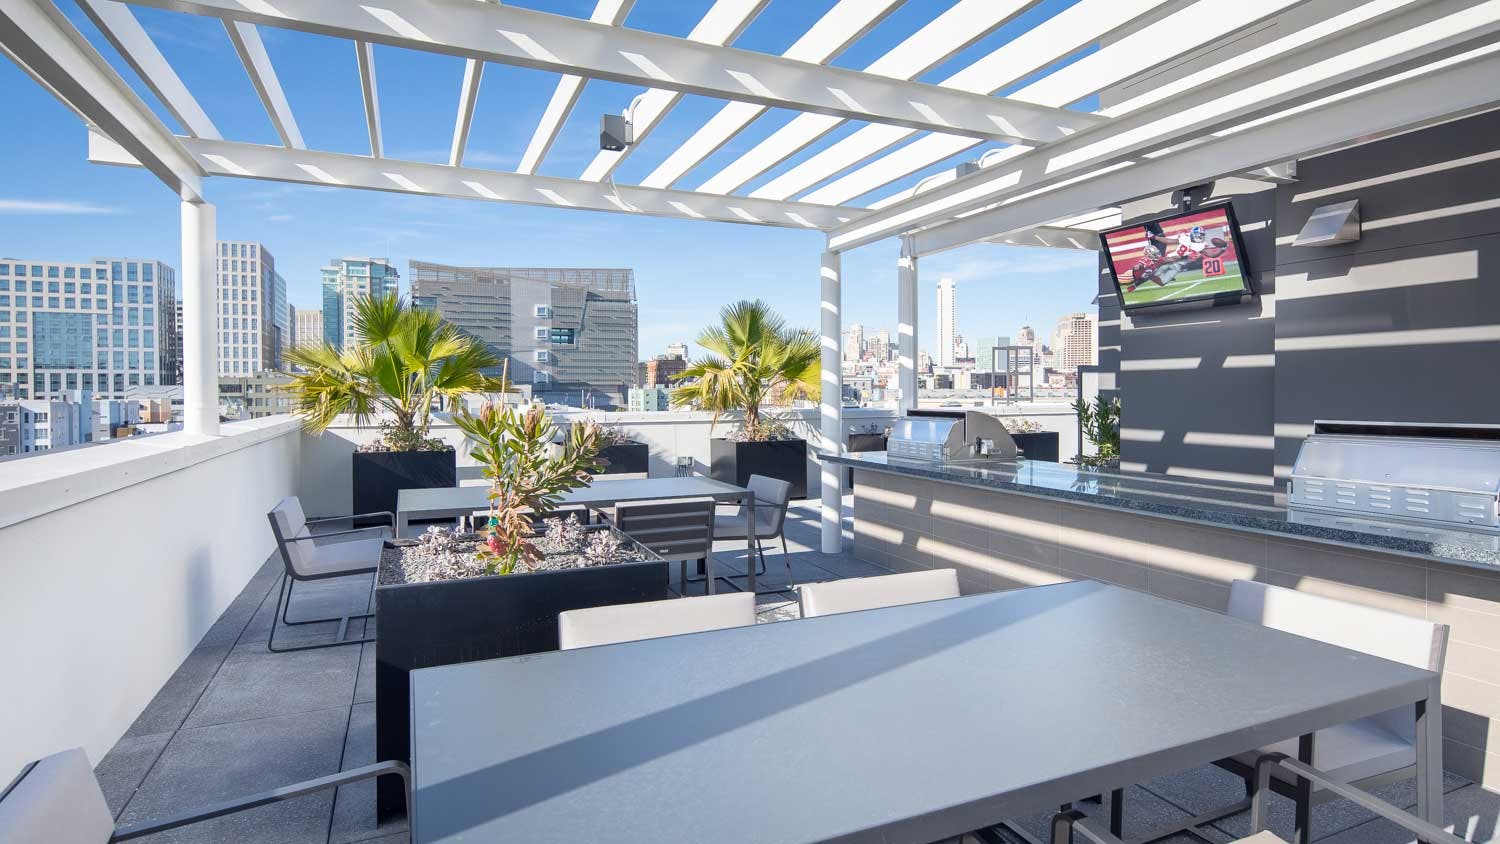 The terrace provides a perfect space for entertainment or gathering, complete with barbecue and dining spaces. 